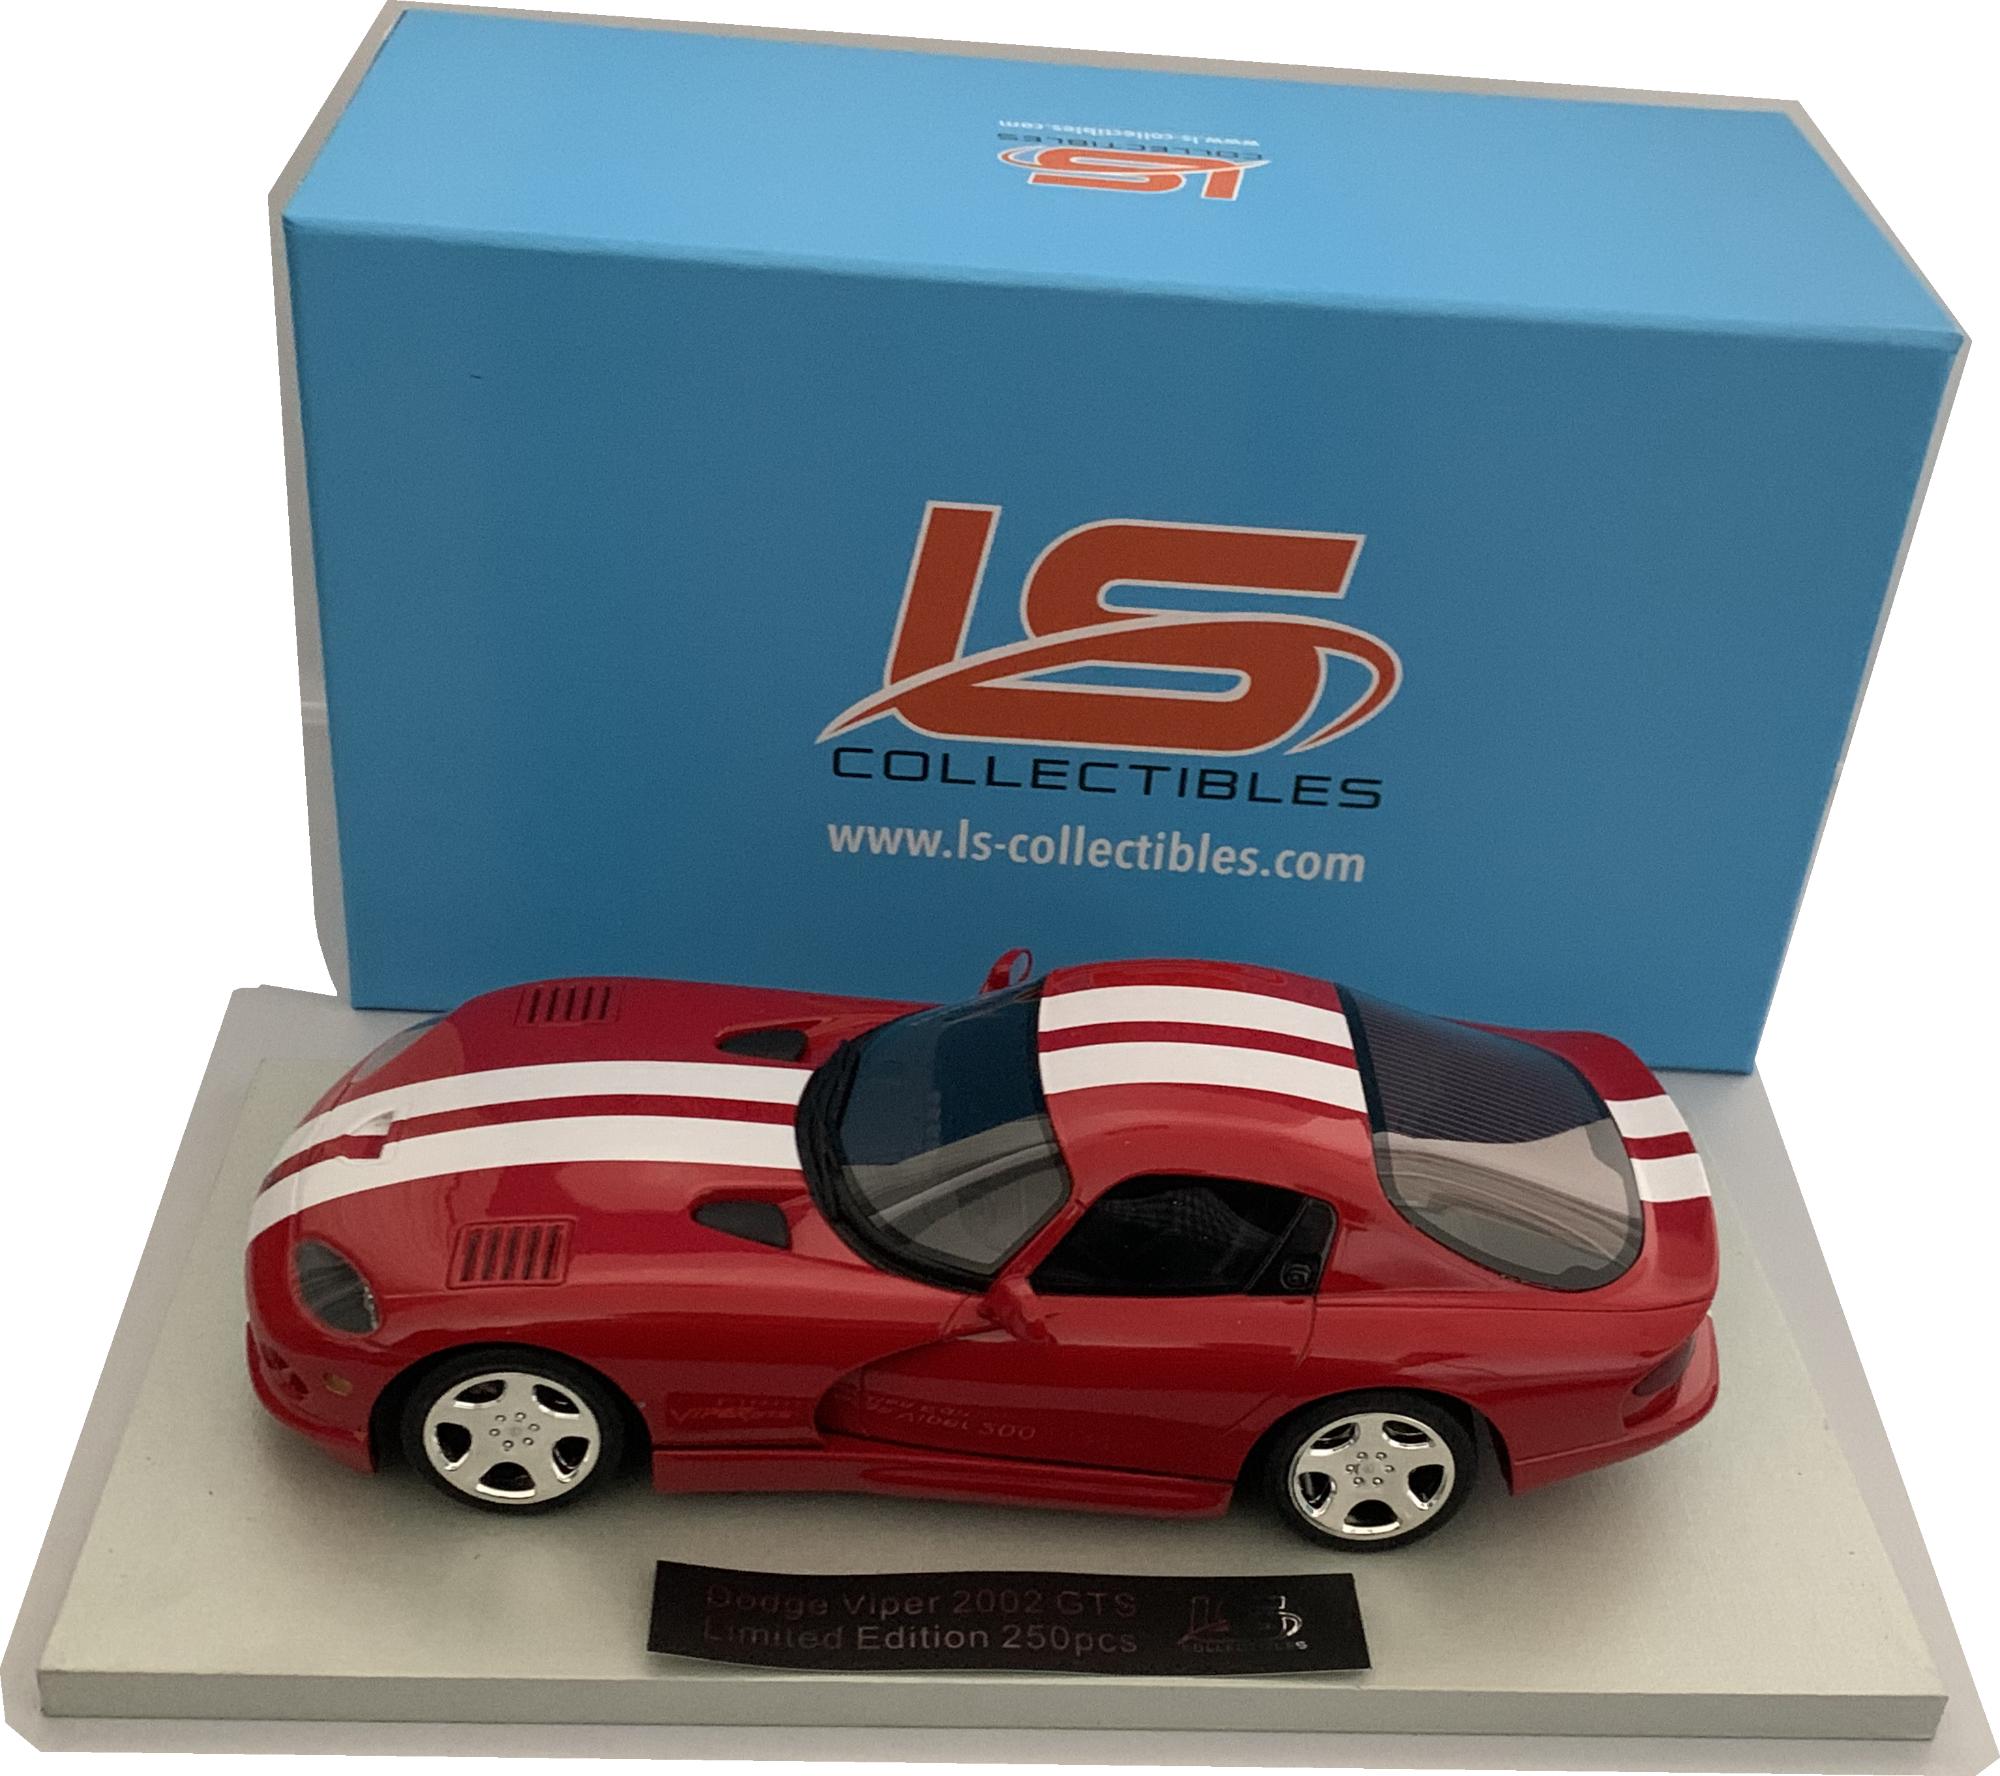 An excellent scale model of the Dodge Viper GTS with high level of detail throughout, all authentically recreated. Model is presented on a removable plinth and presented in a beautiful presentation box.  One of a limited edition of 250 pieces worldwide